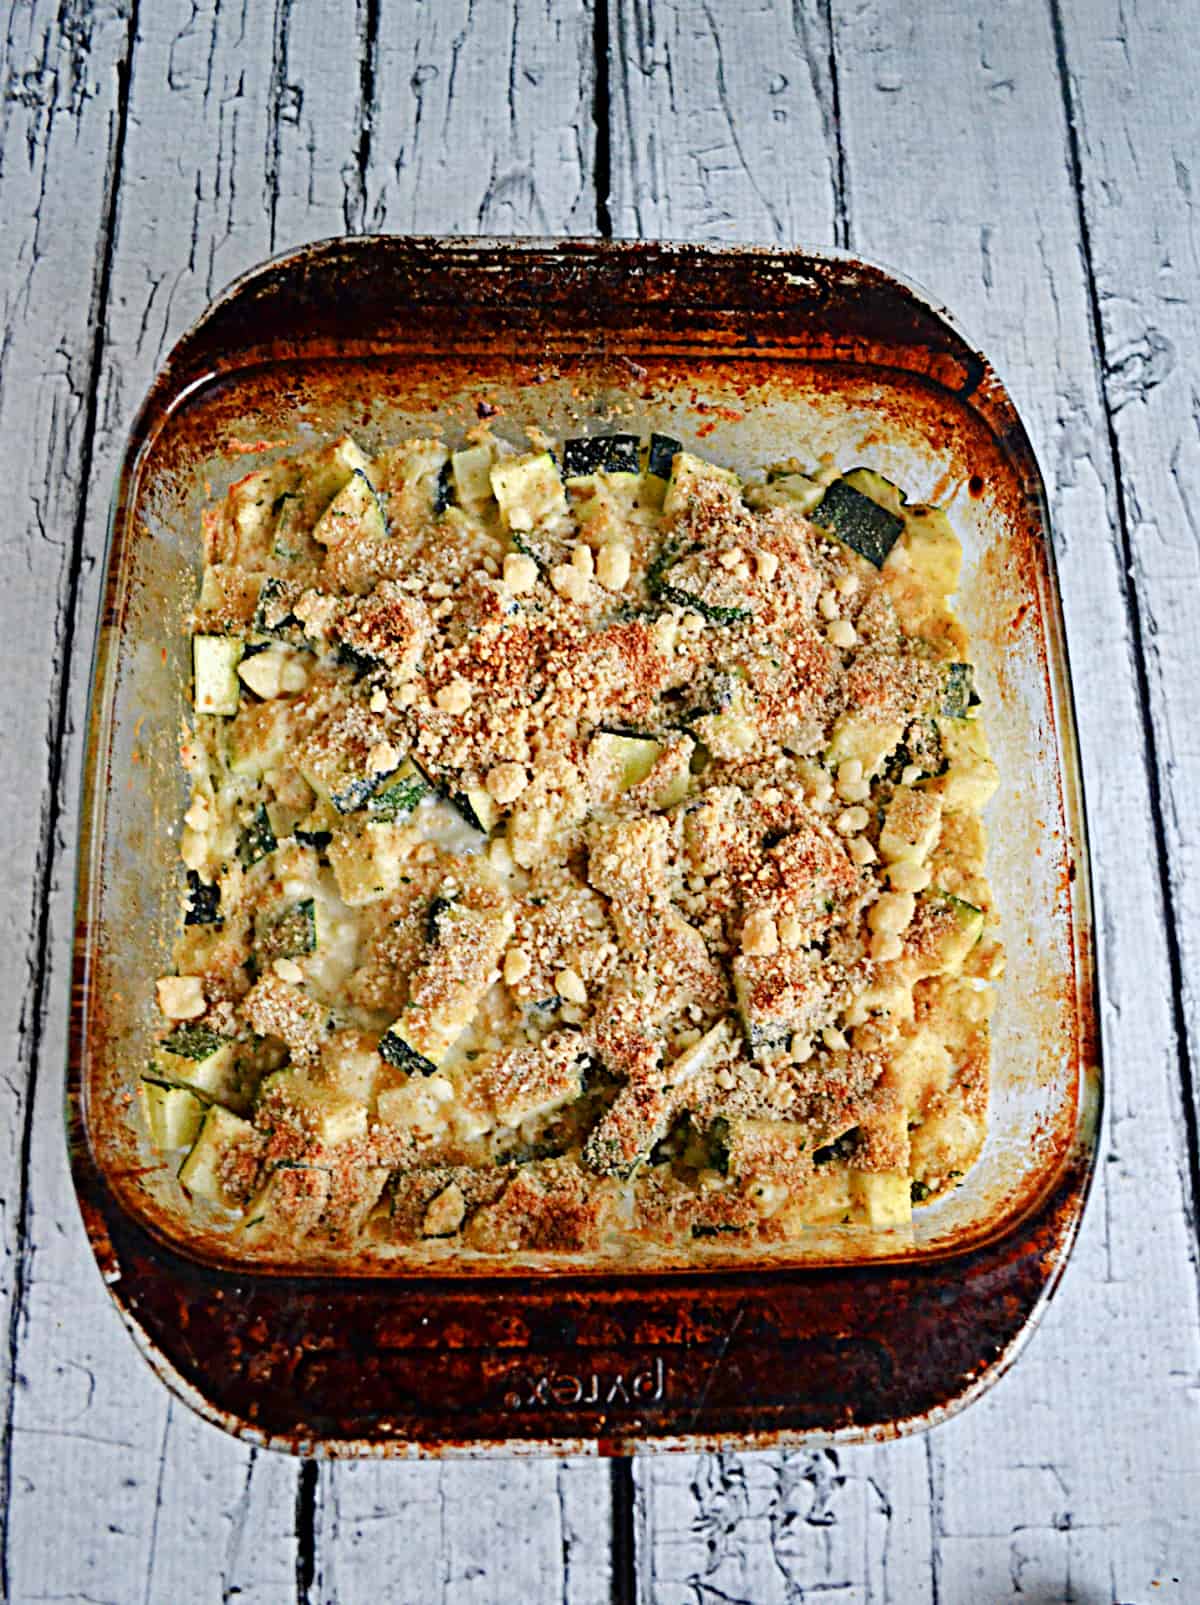 A dish of zucchini with toasted breadcrumbs on top.